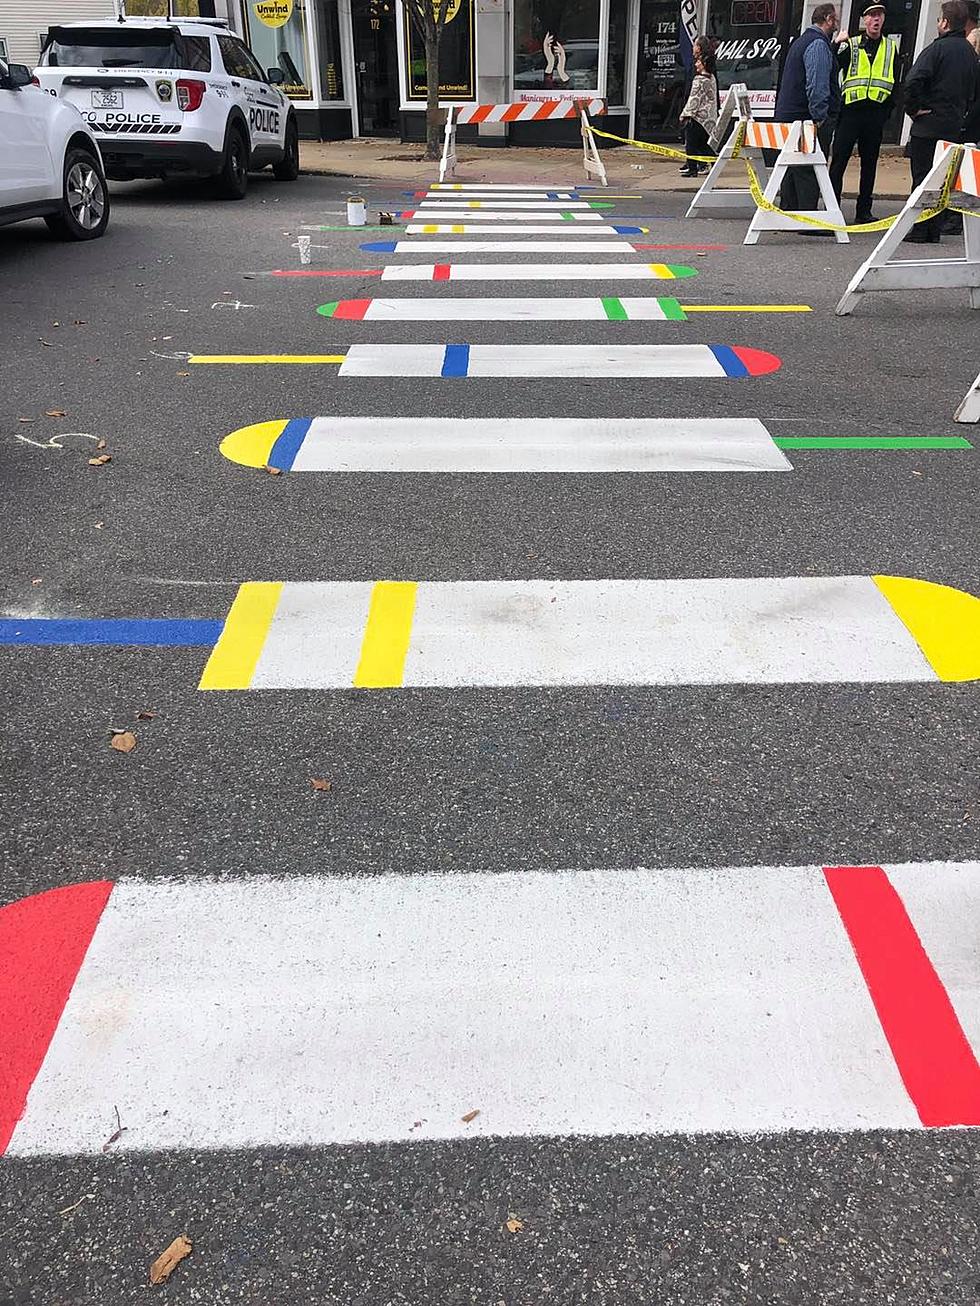 Check Out the First Crosswalk to Ever be Decorated in Saco